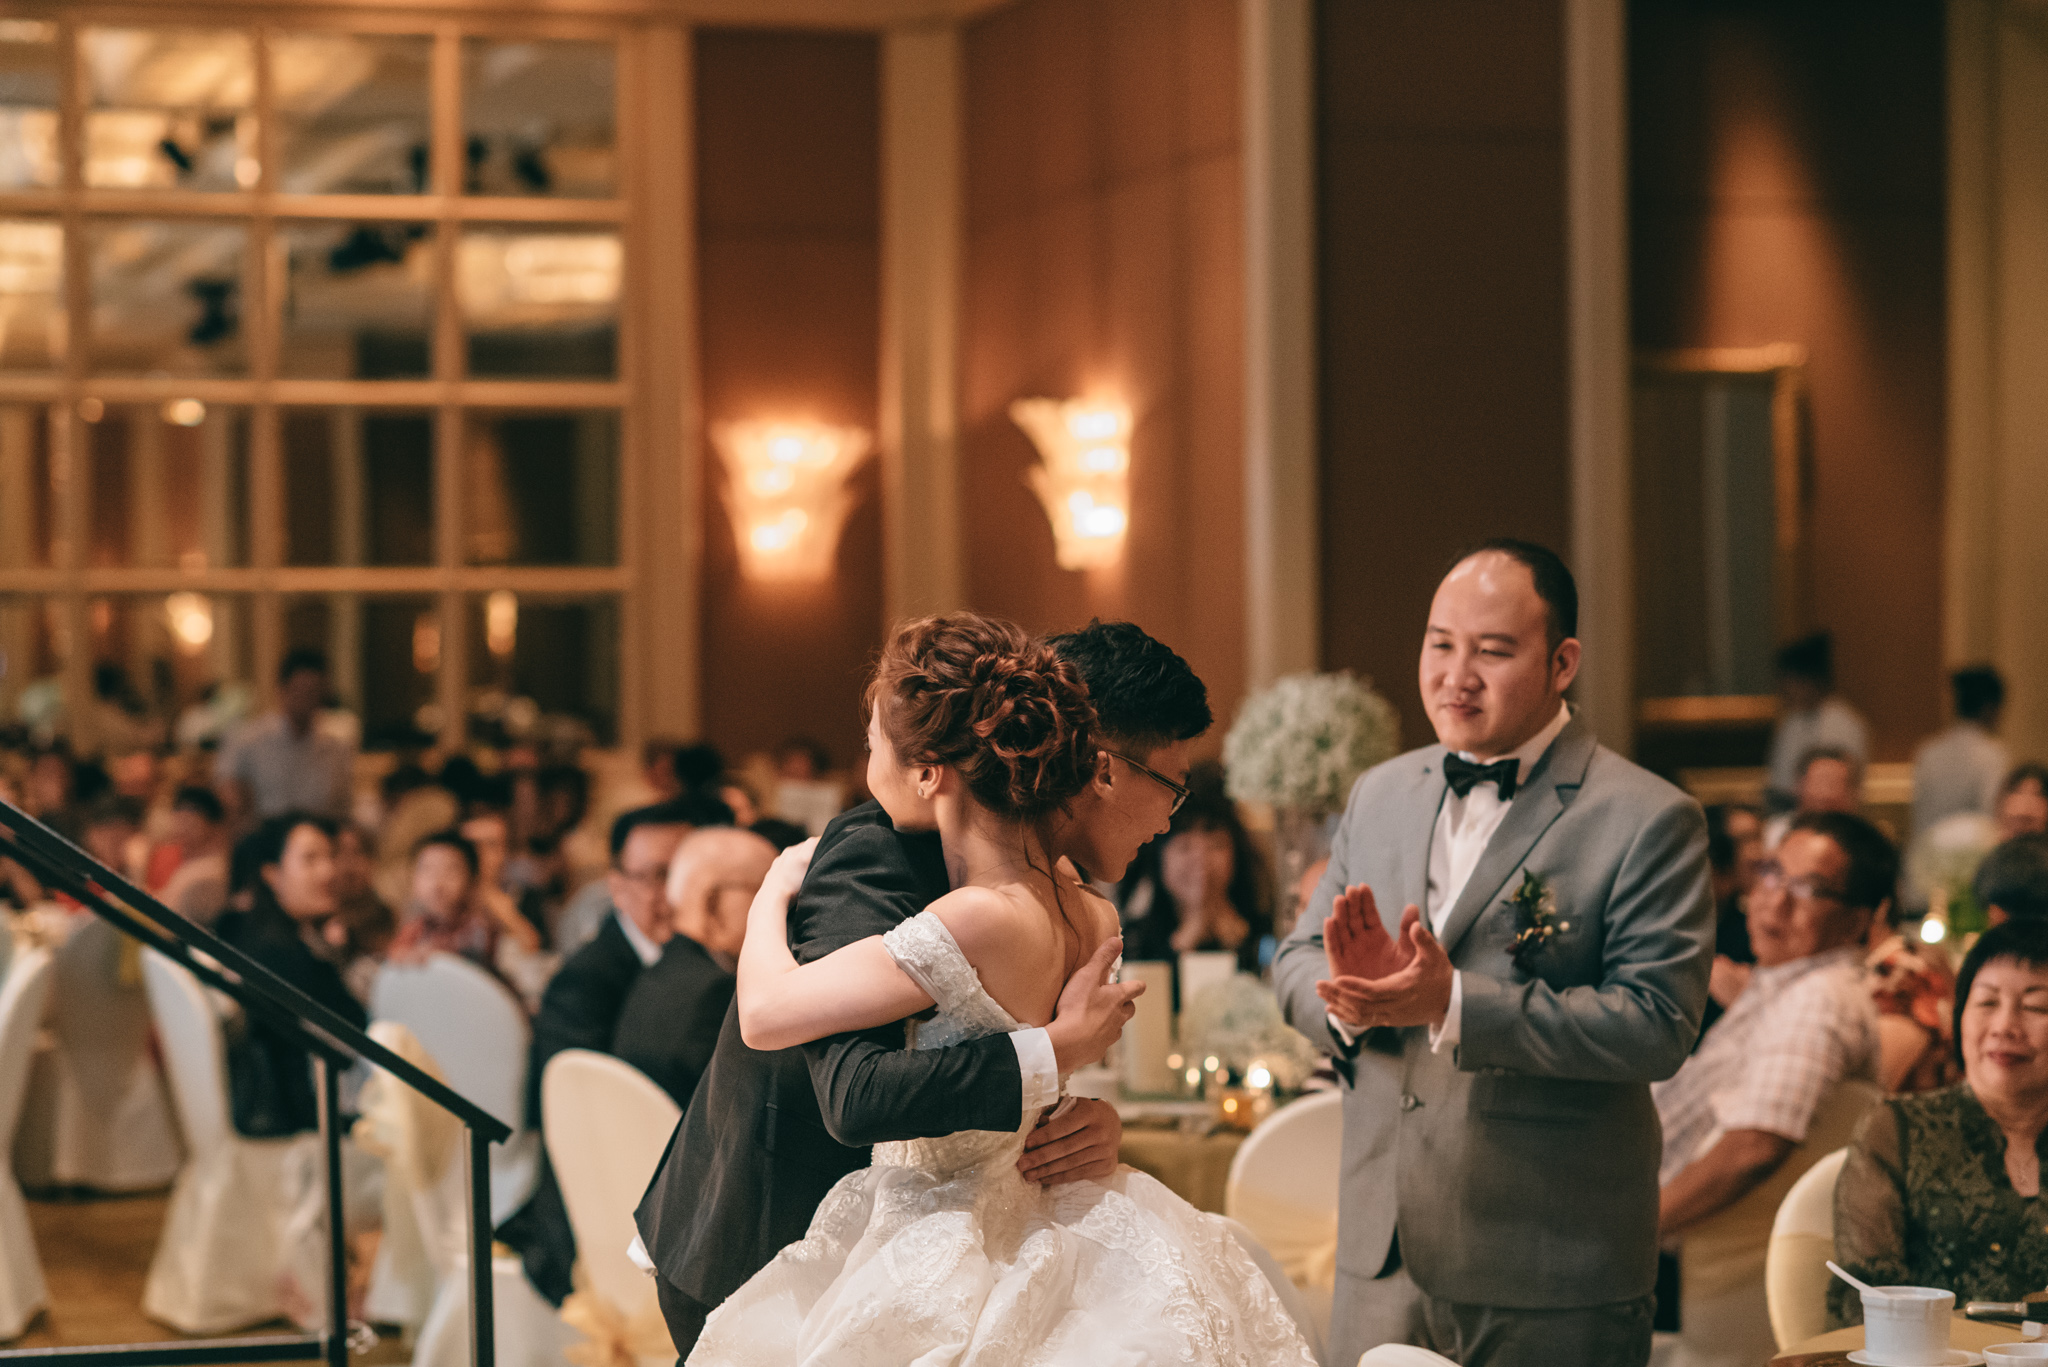 Eunice & Winshire Wedding Day Highlights (resized for sharing) - 193.jpg